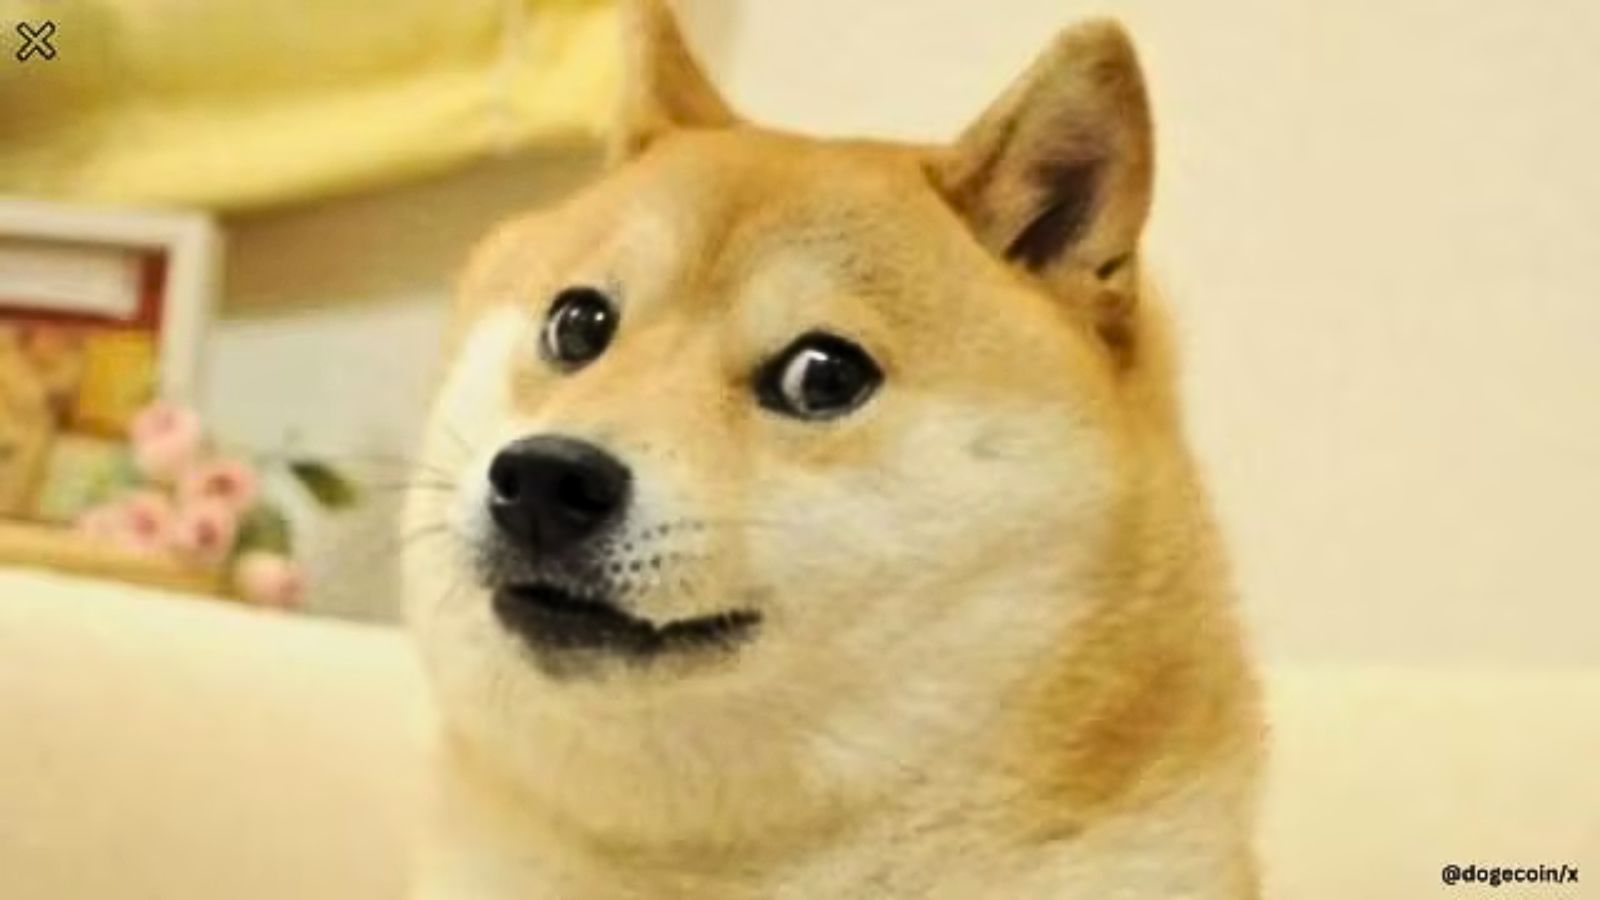 What is the story of Doge meme icon, Kabosu? | World News - The Indian ...